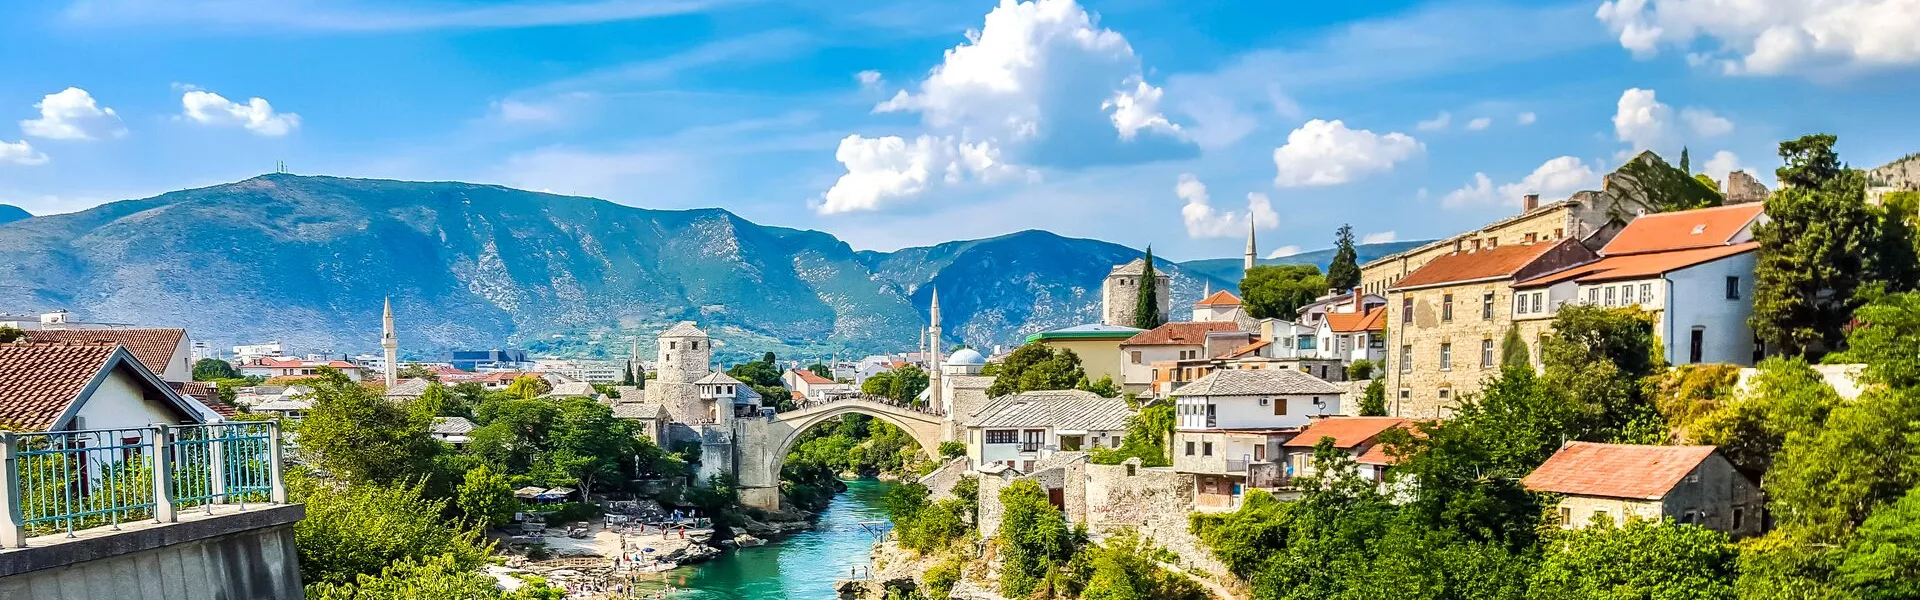 The old bridge in Mostar with mountains behind